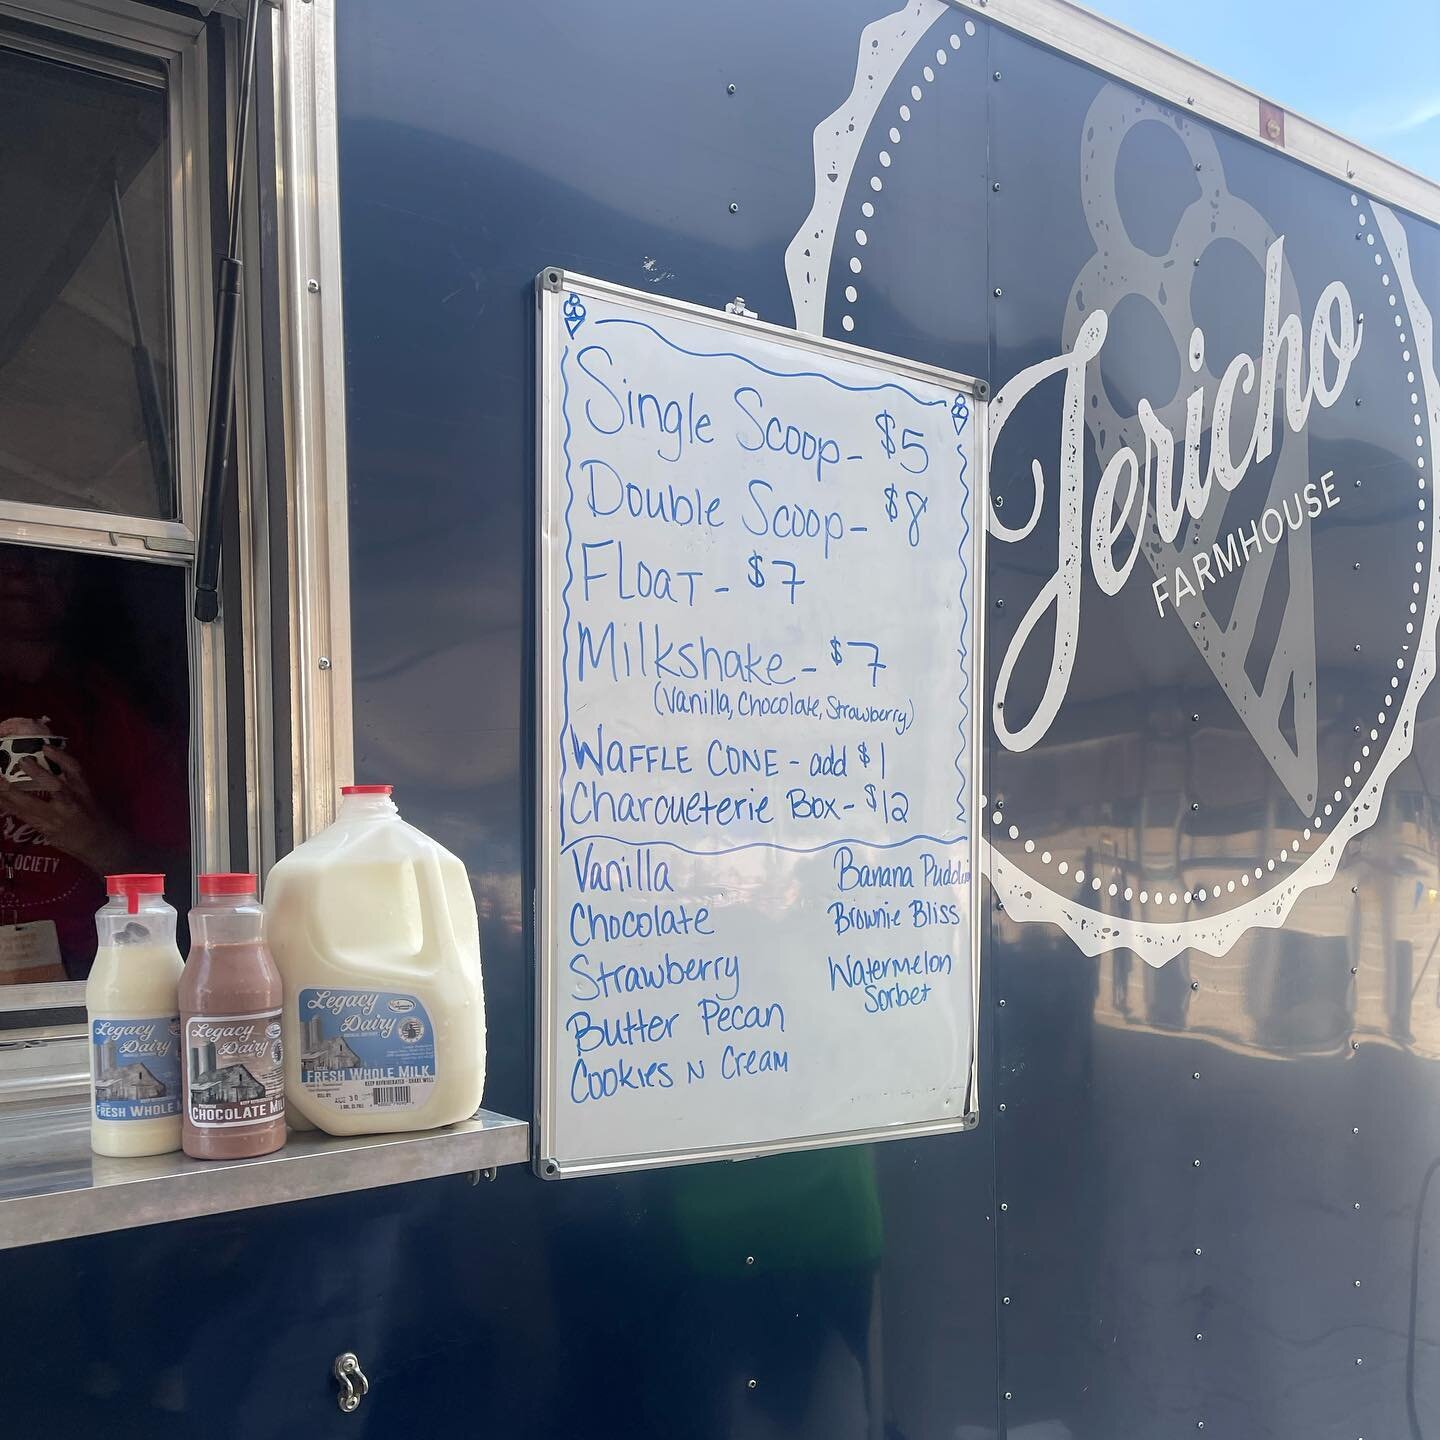 If you find yourself at the #KentuckyStateFair this week, stop by the @jerichofarmhouse trailer in the Great @kentuckyproud Cook Out Tent for some delicious dairy treats including pints of the award winning Legacy milk as well as milkshakes made with